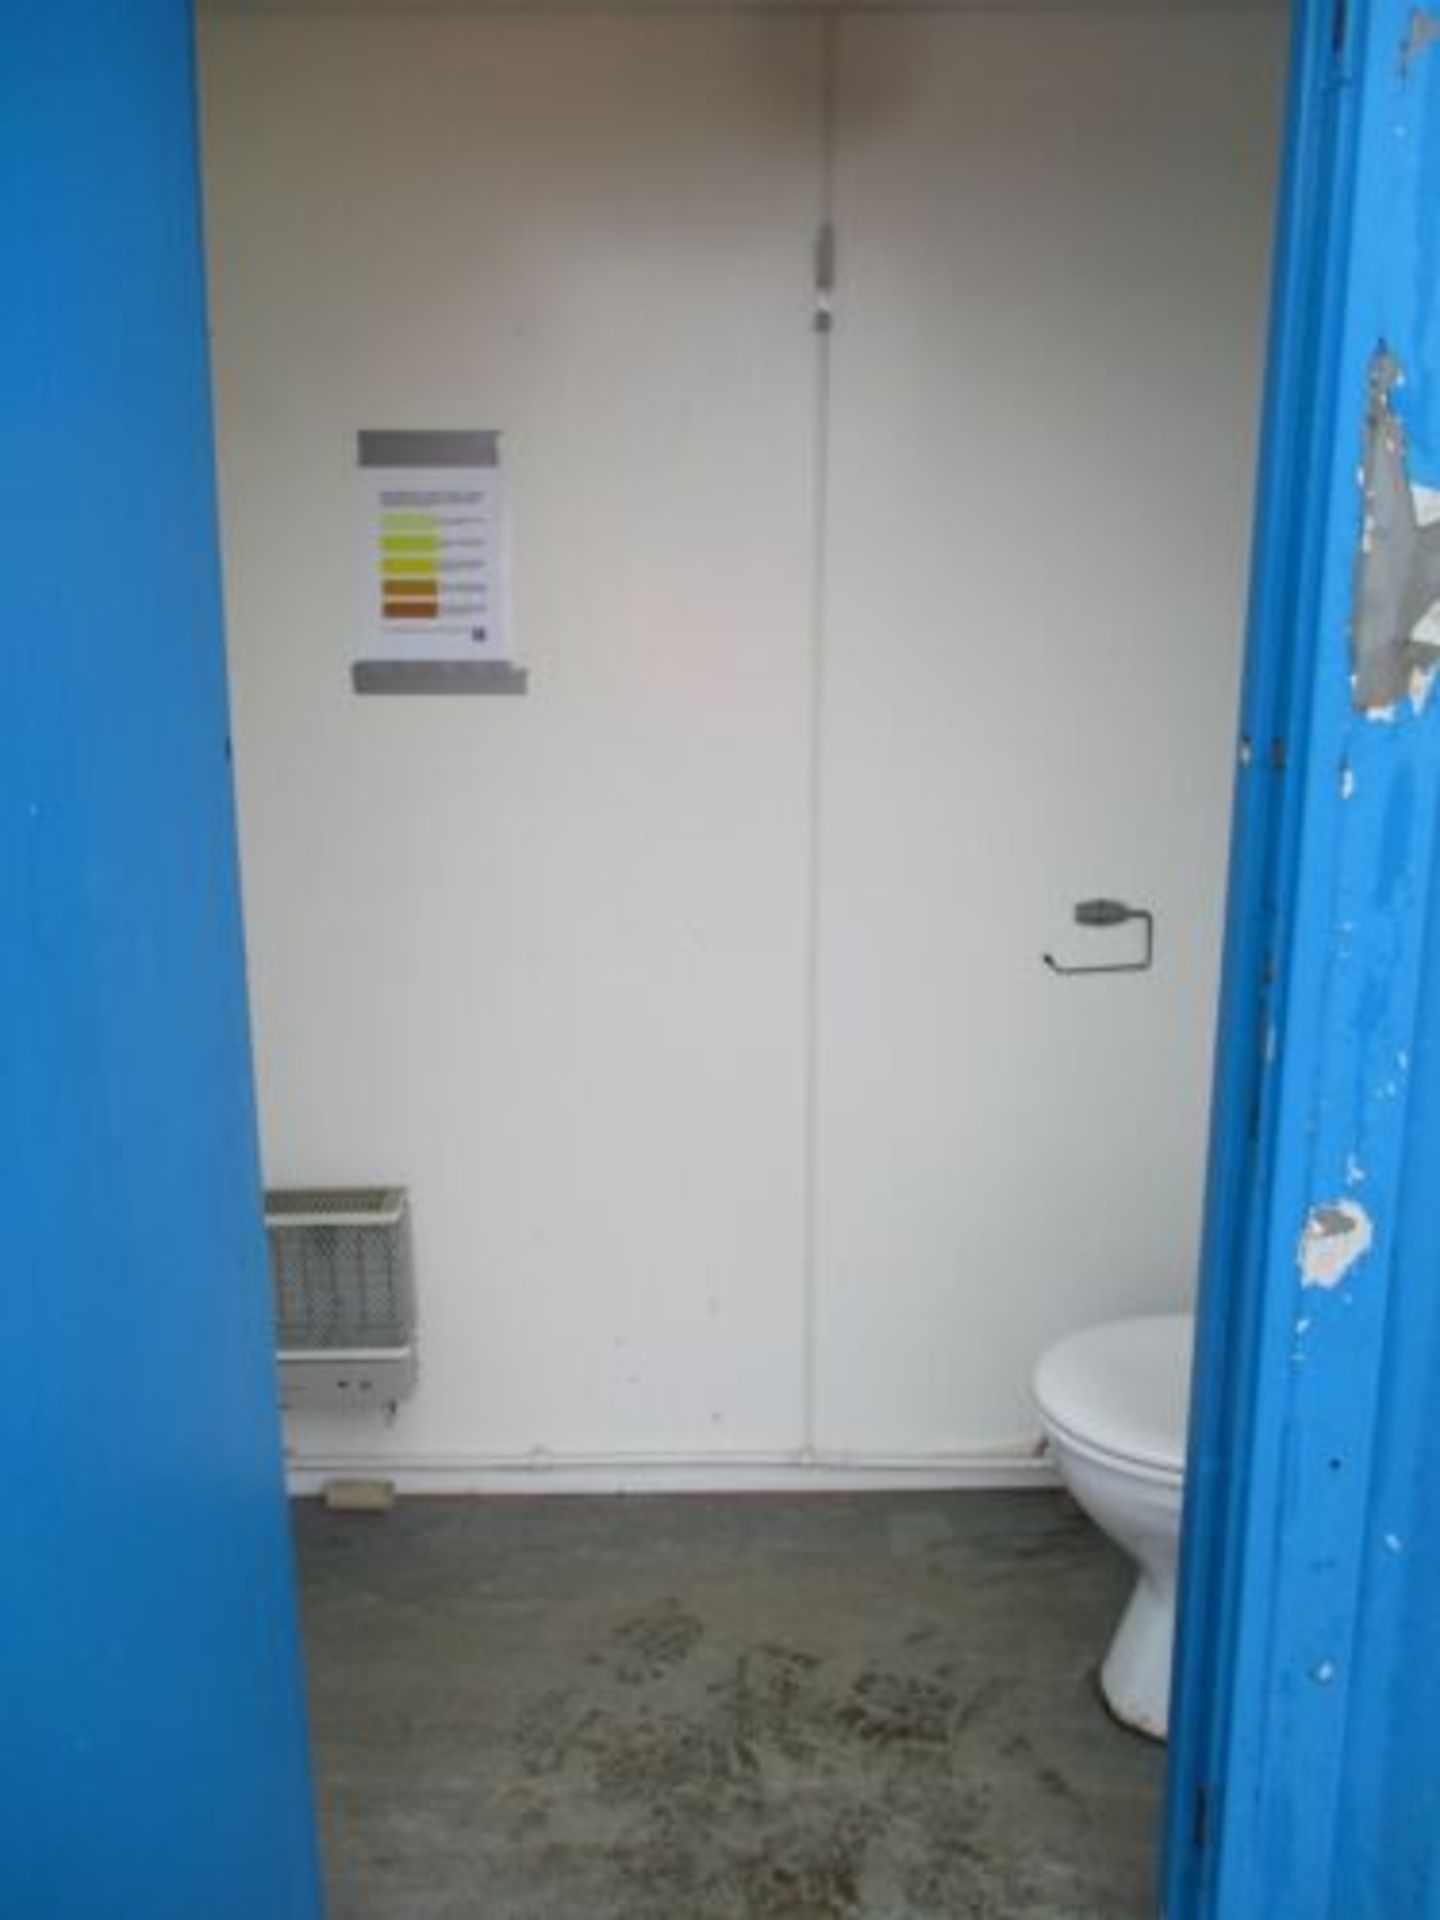 16 FT FEET FOOT SECURE SHIPPING CONTAINER TOILET BLOCK 3 + 1 - Image 8 of 8